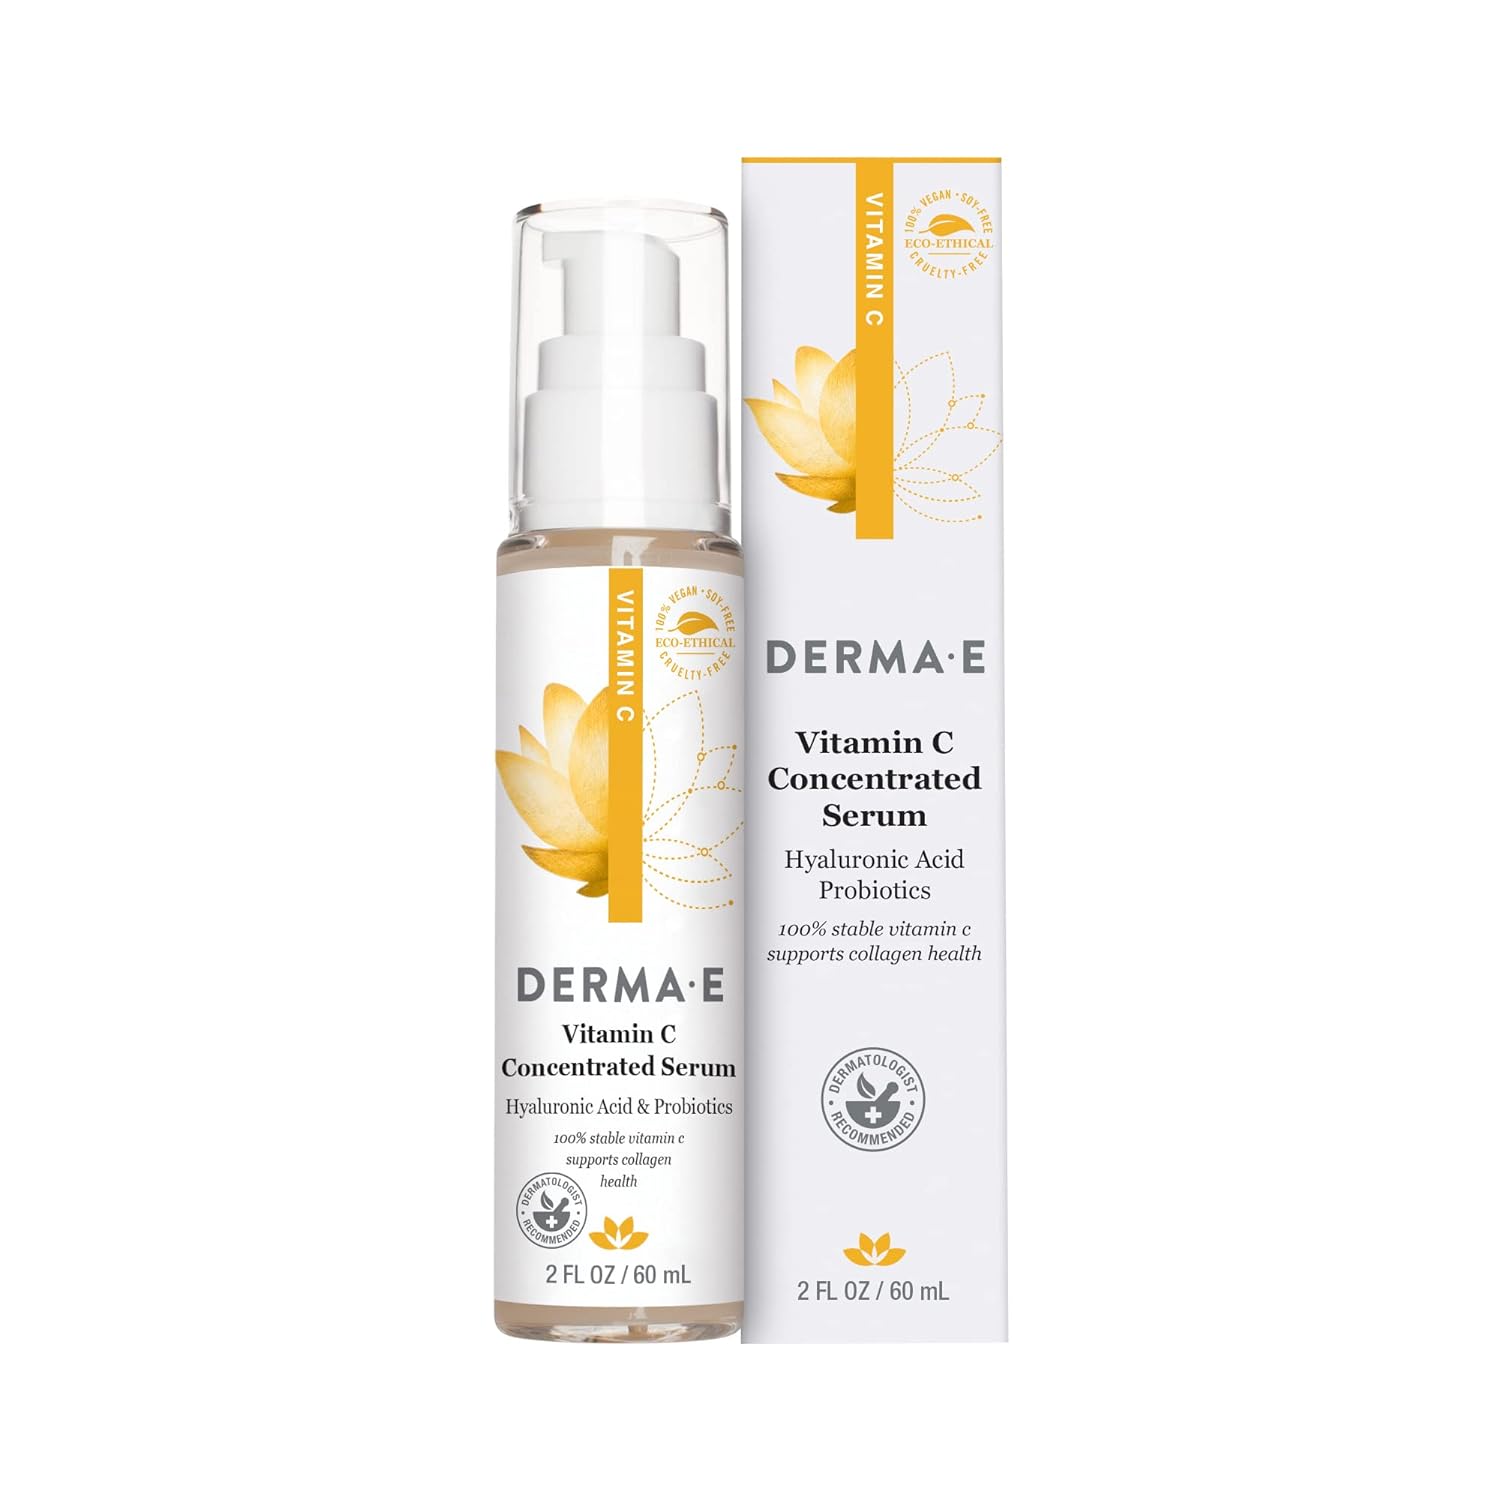 DERMA E Vitamin C Concentrated Serum with Hyaluronic Acid – All Natural, Antioxidant-Rich Concentrated Facial Serum – Firming and Brightening Skin Serum, 2oz